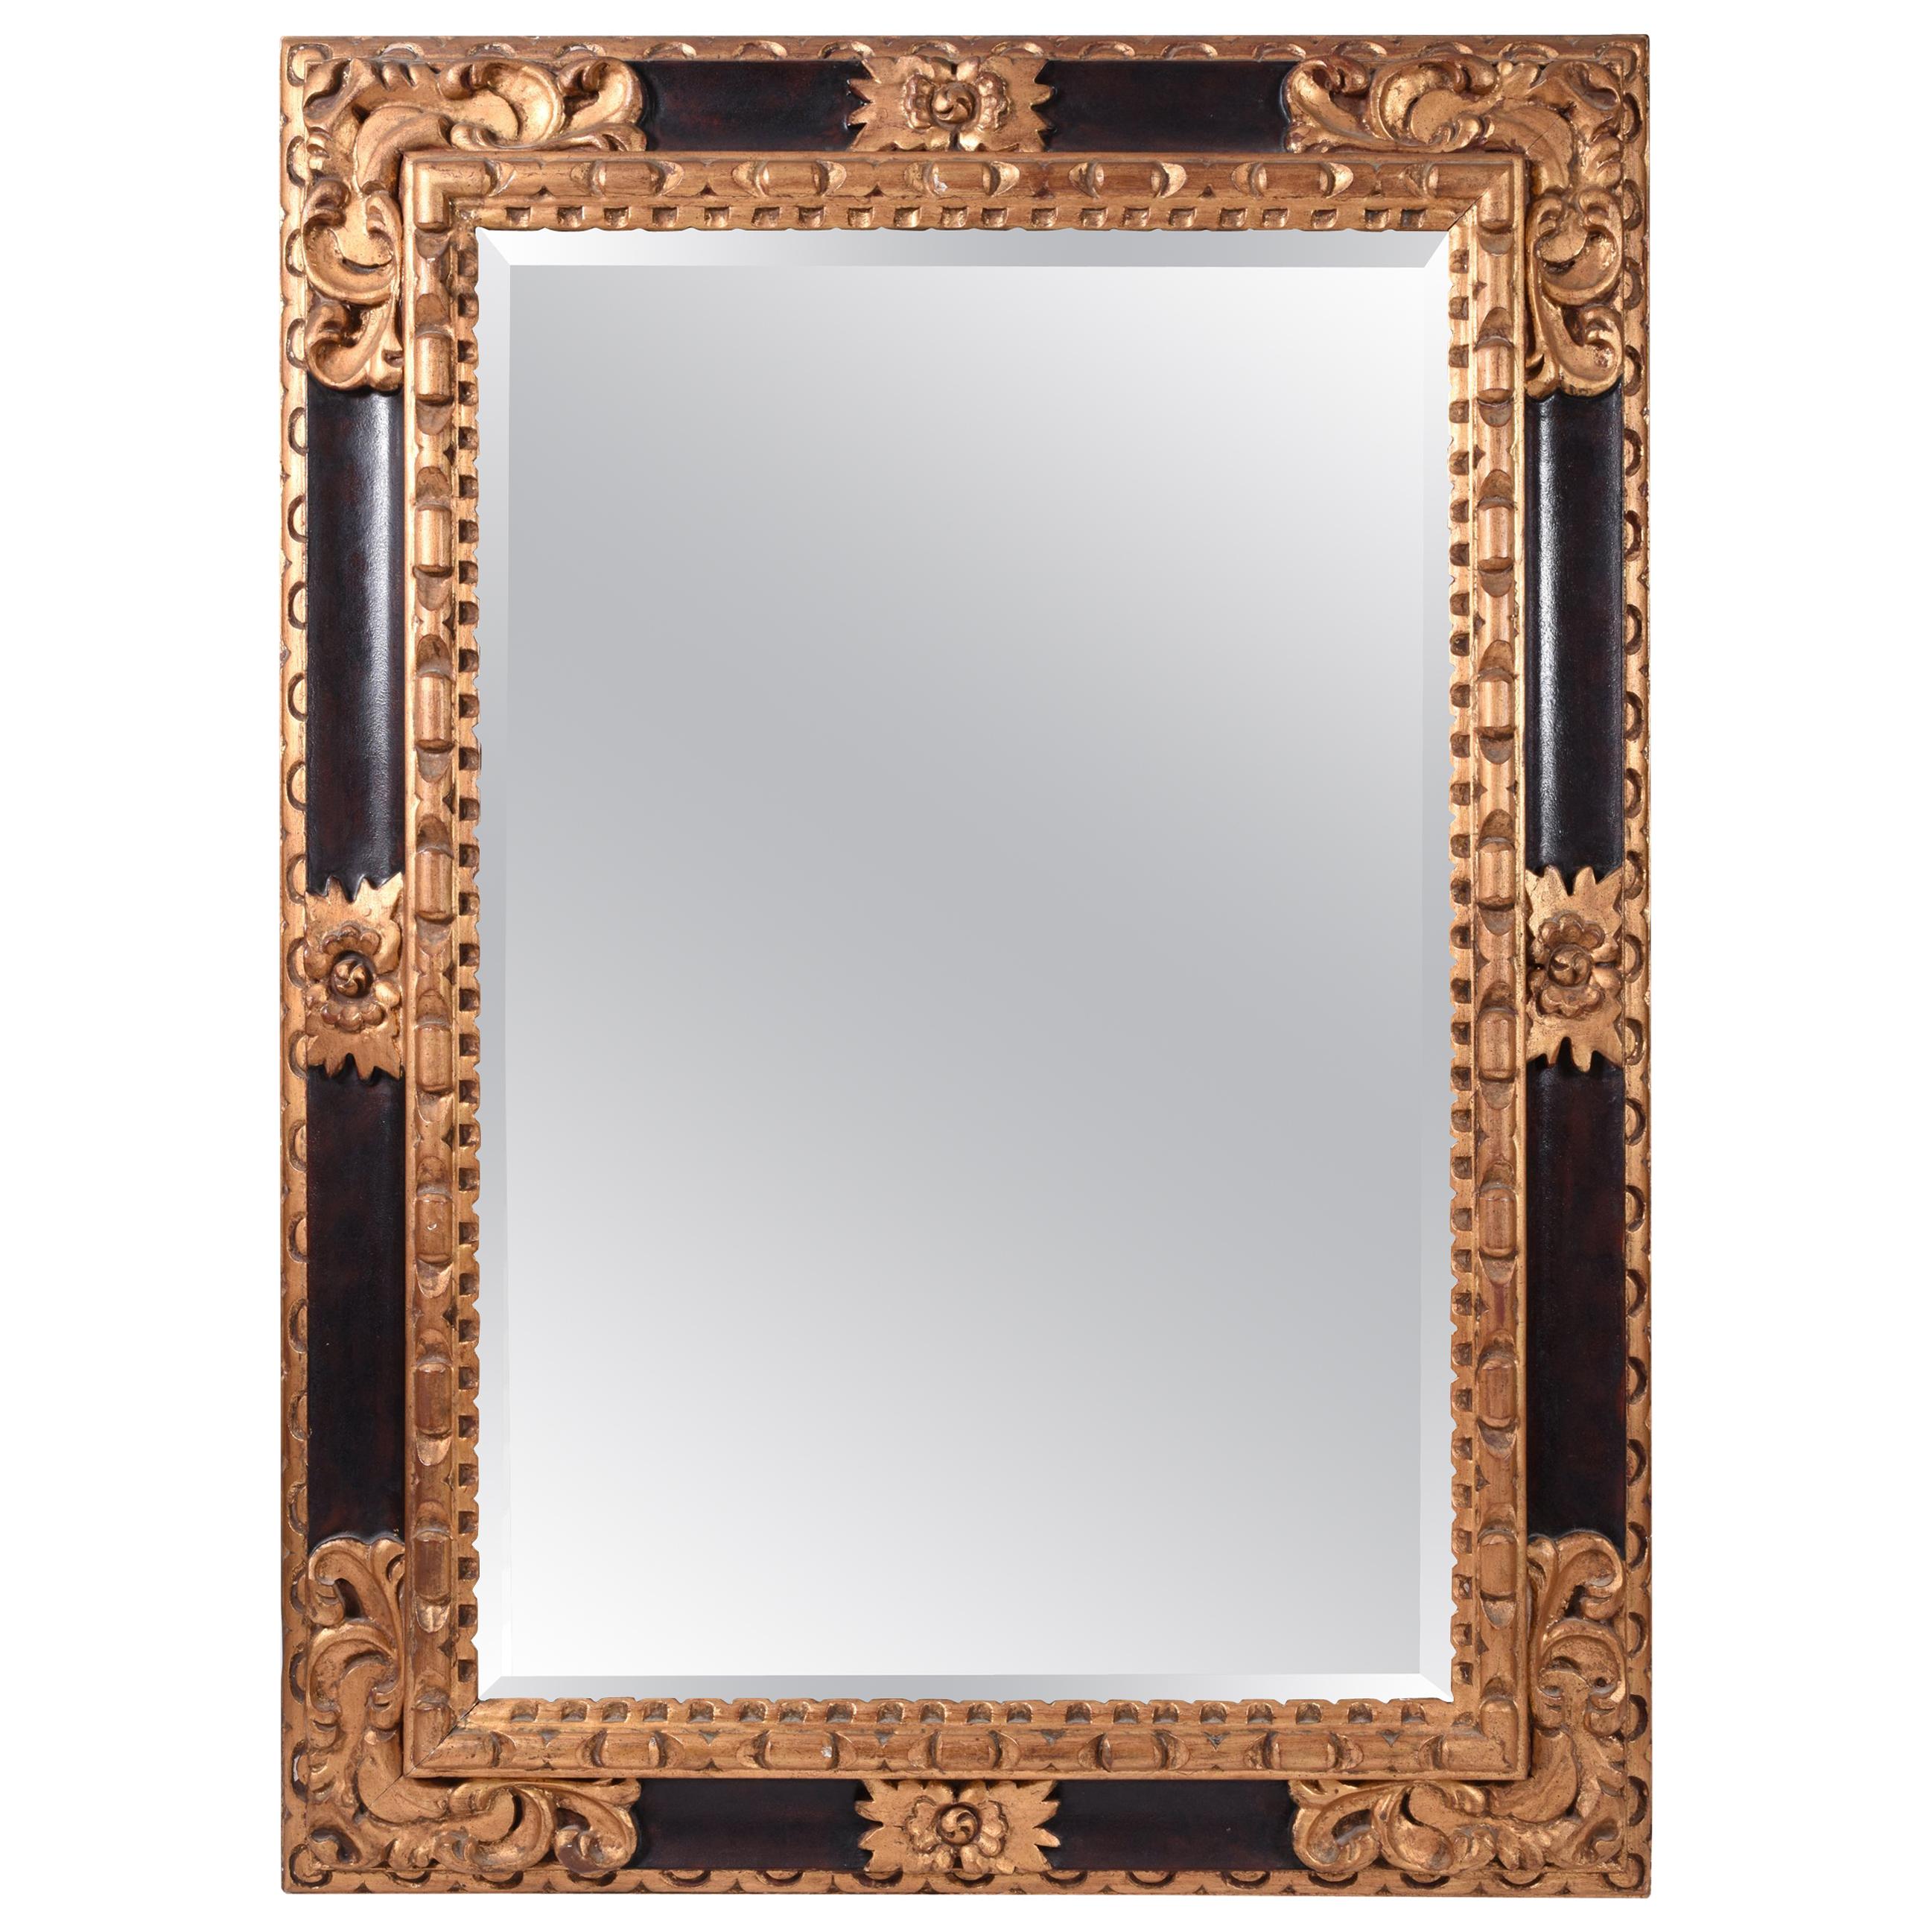 Mid-20th Century Giltwood Framed Hanging Wall Mirror